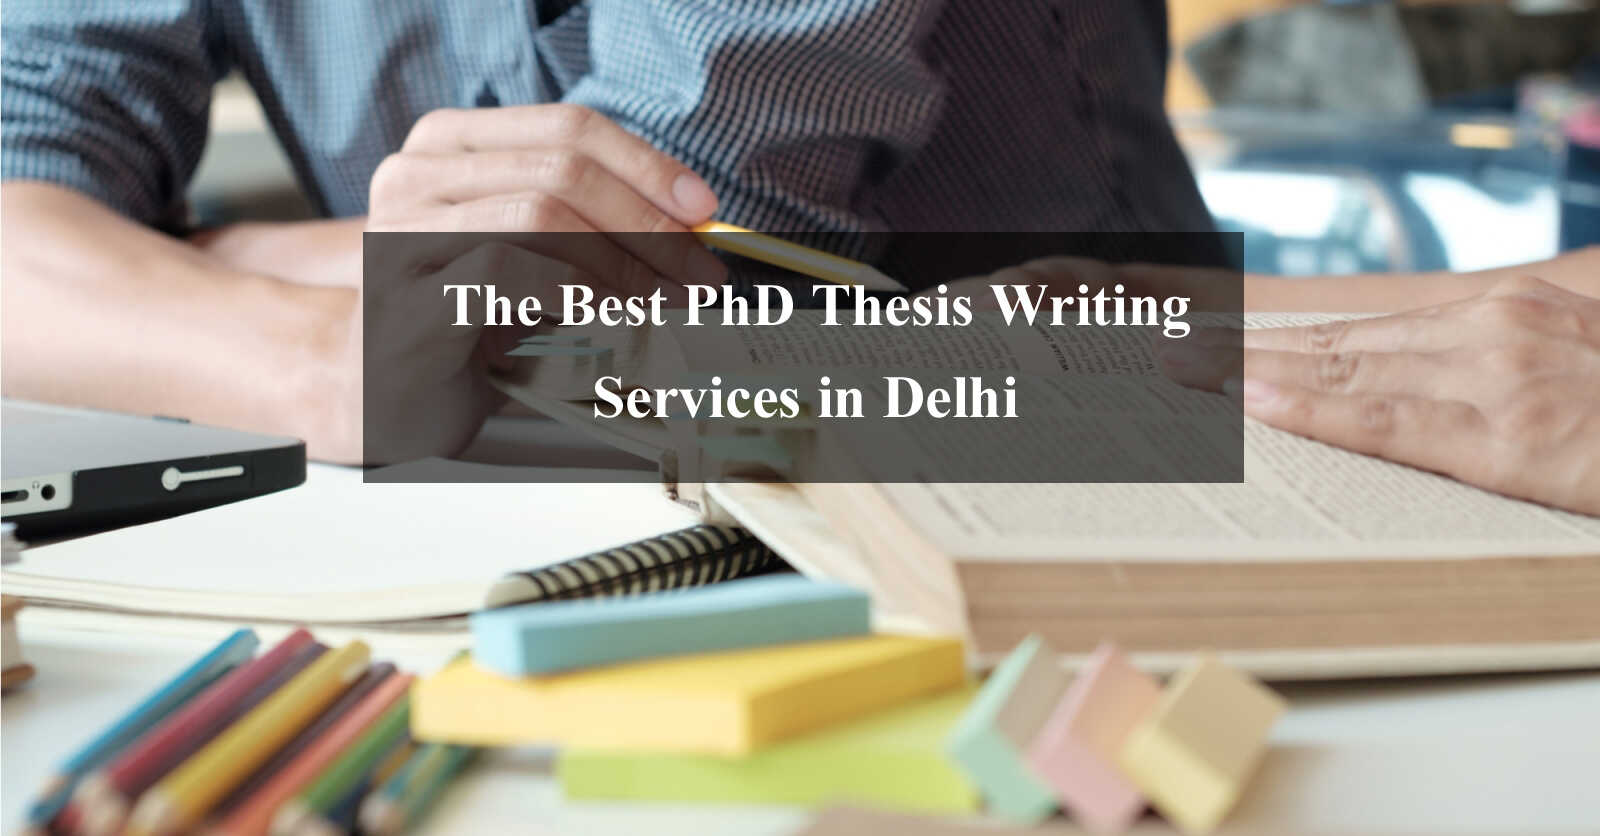 phd thesis writing services cost